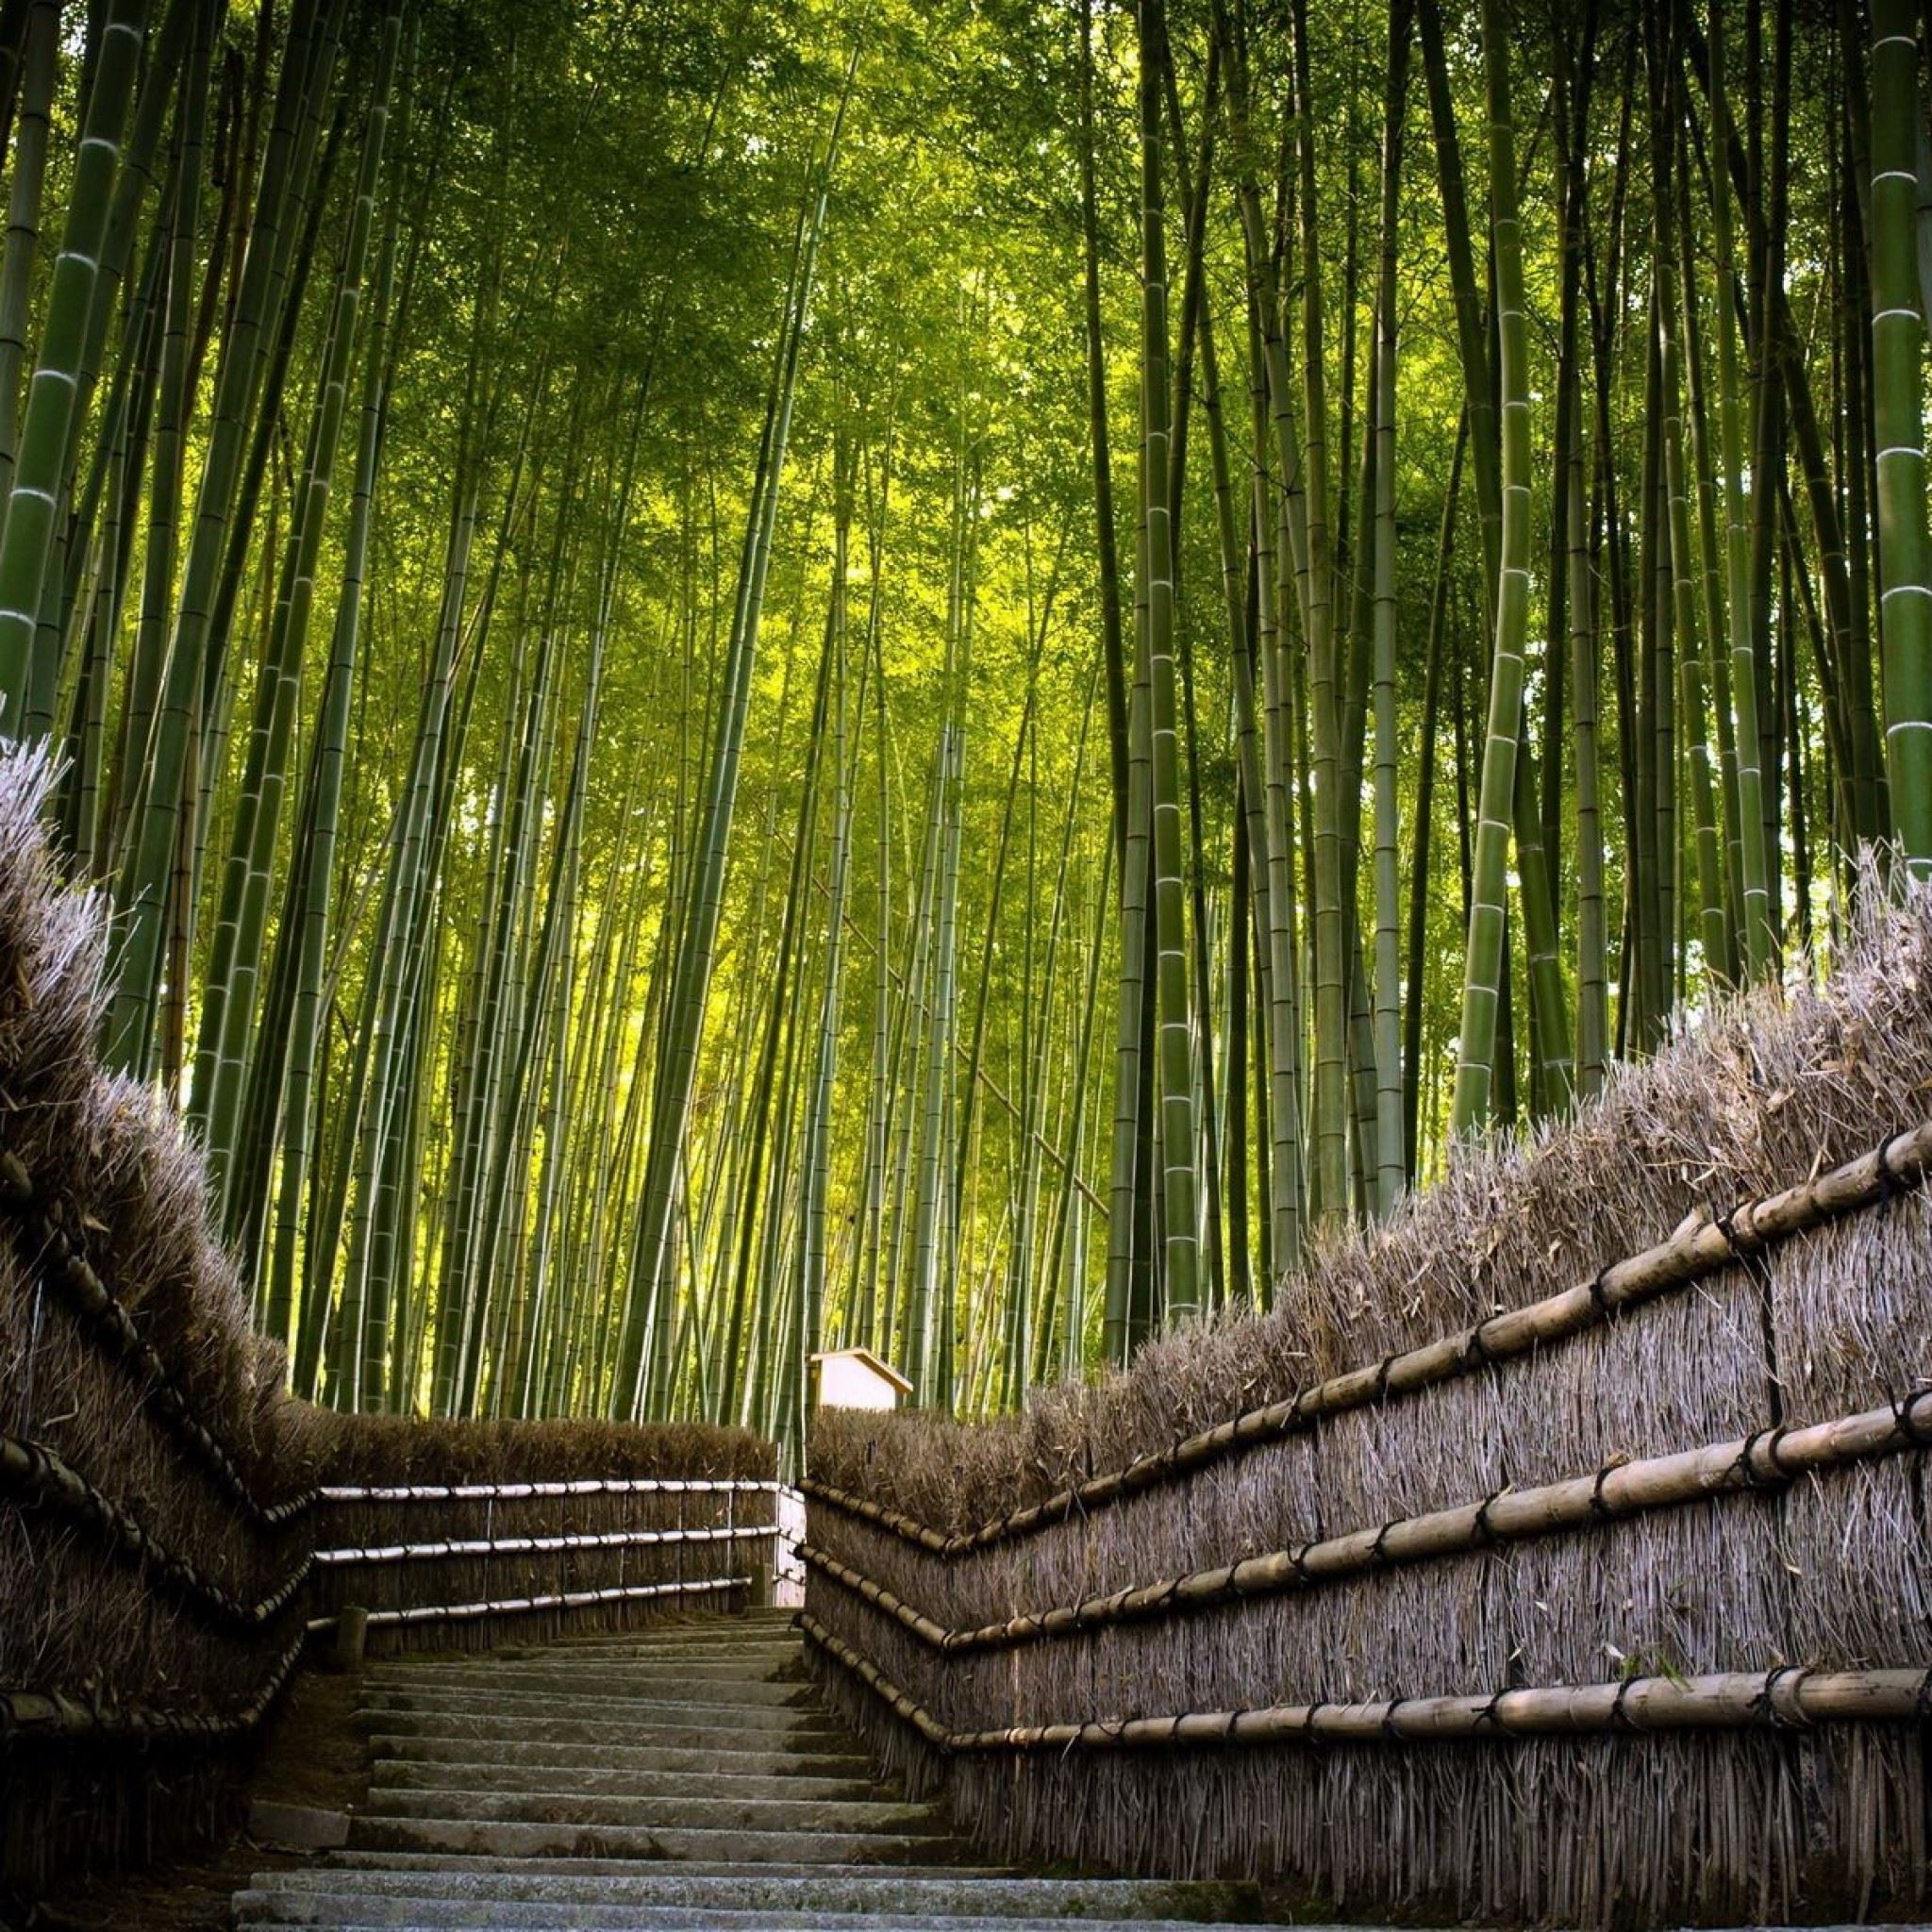 Bamboo Forest iPad Air wallpaper 